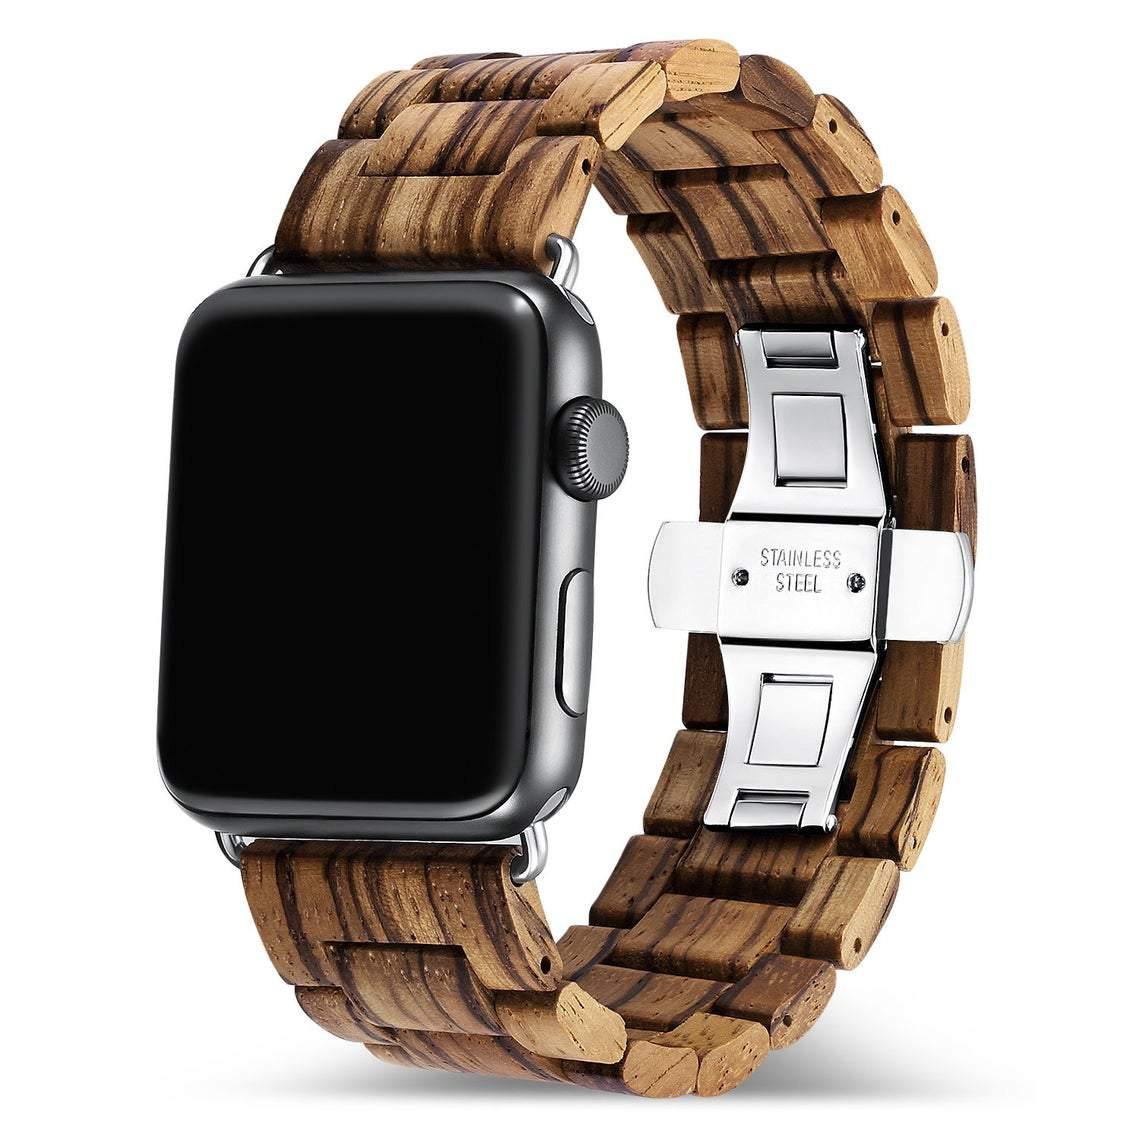 Zebra Wooden Band for Apple Watch 🌳 Natural Wood. ♻️ Eco-friendly. ✈️ Free Worldwide Shipping. 🎁 Perfect Gift.